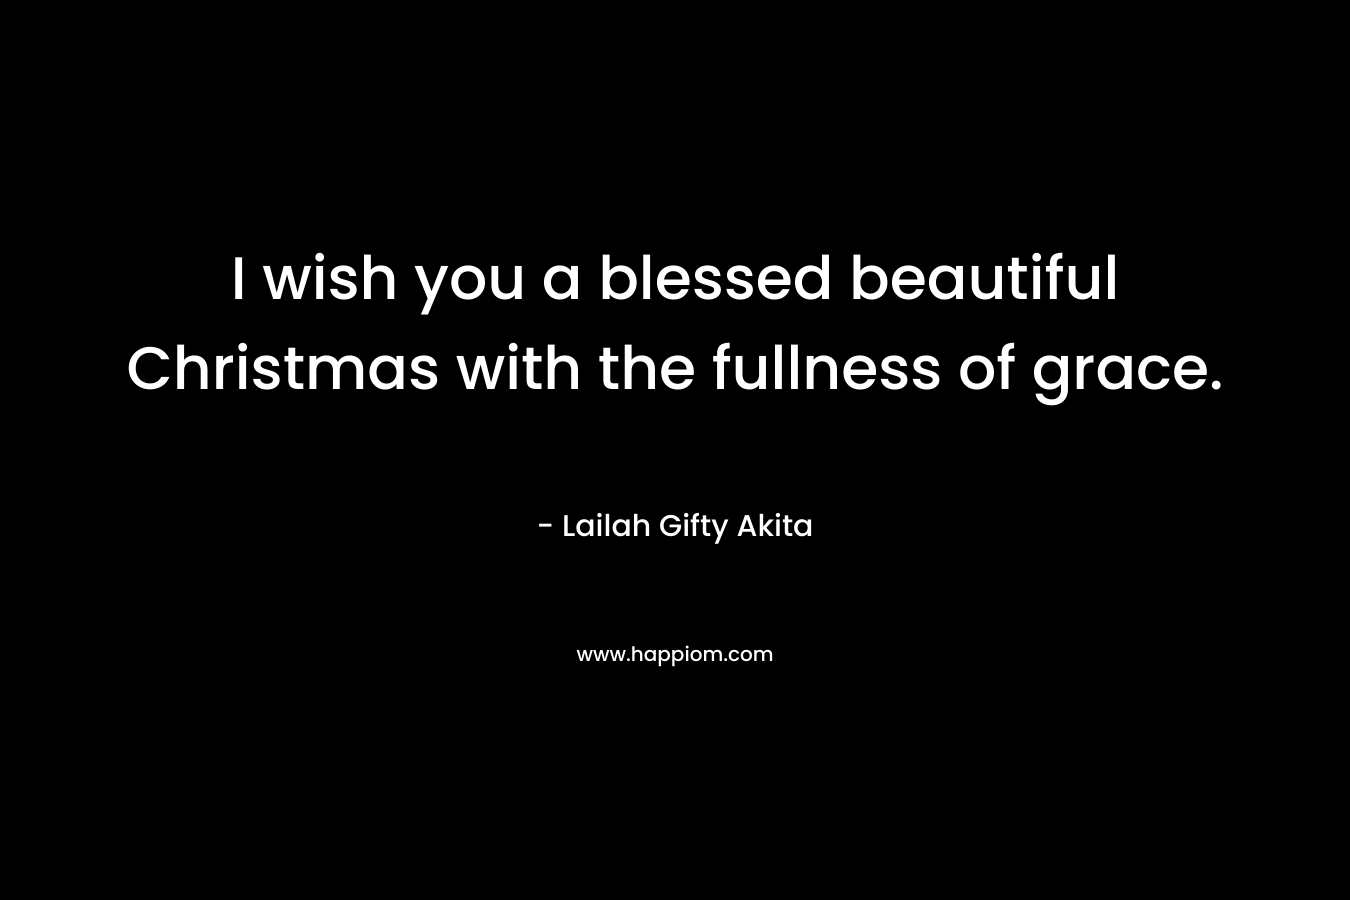 I wish you a blessed beautiful Christmas with the fullness of grace.